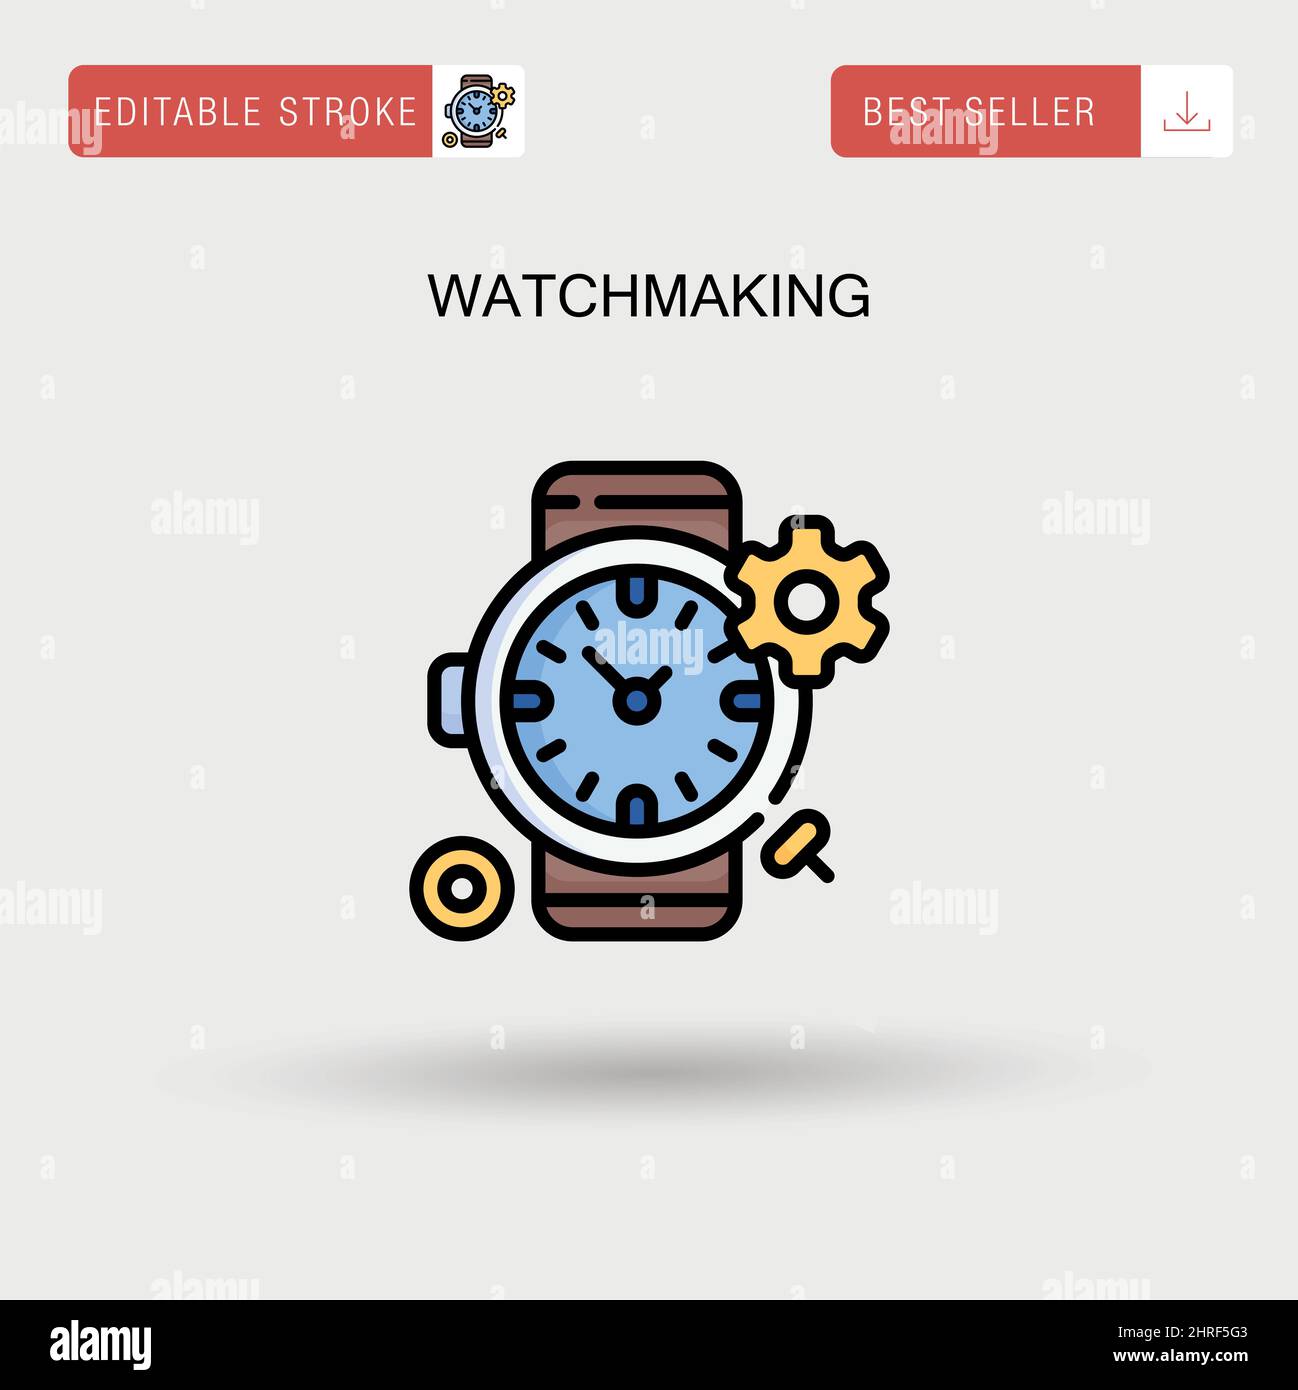 Watchmaking Simple vector icon. Stock Vector